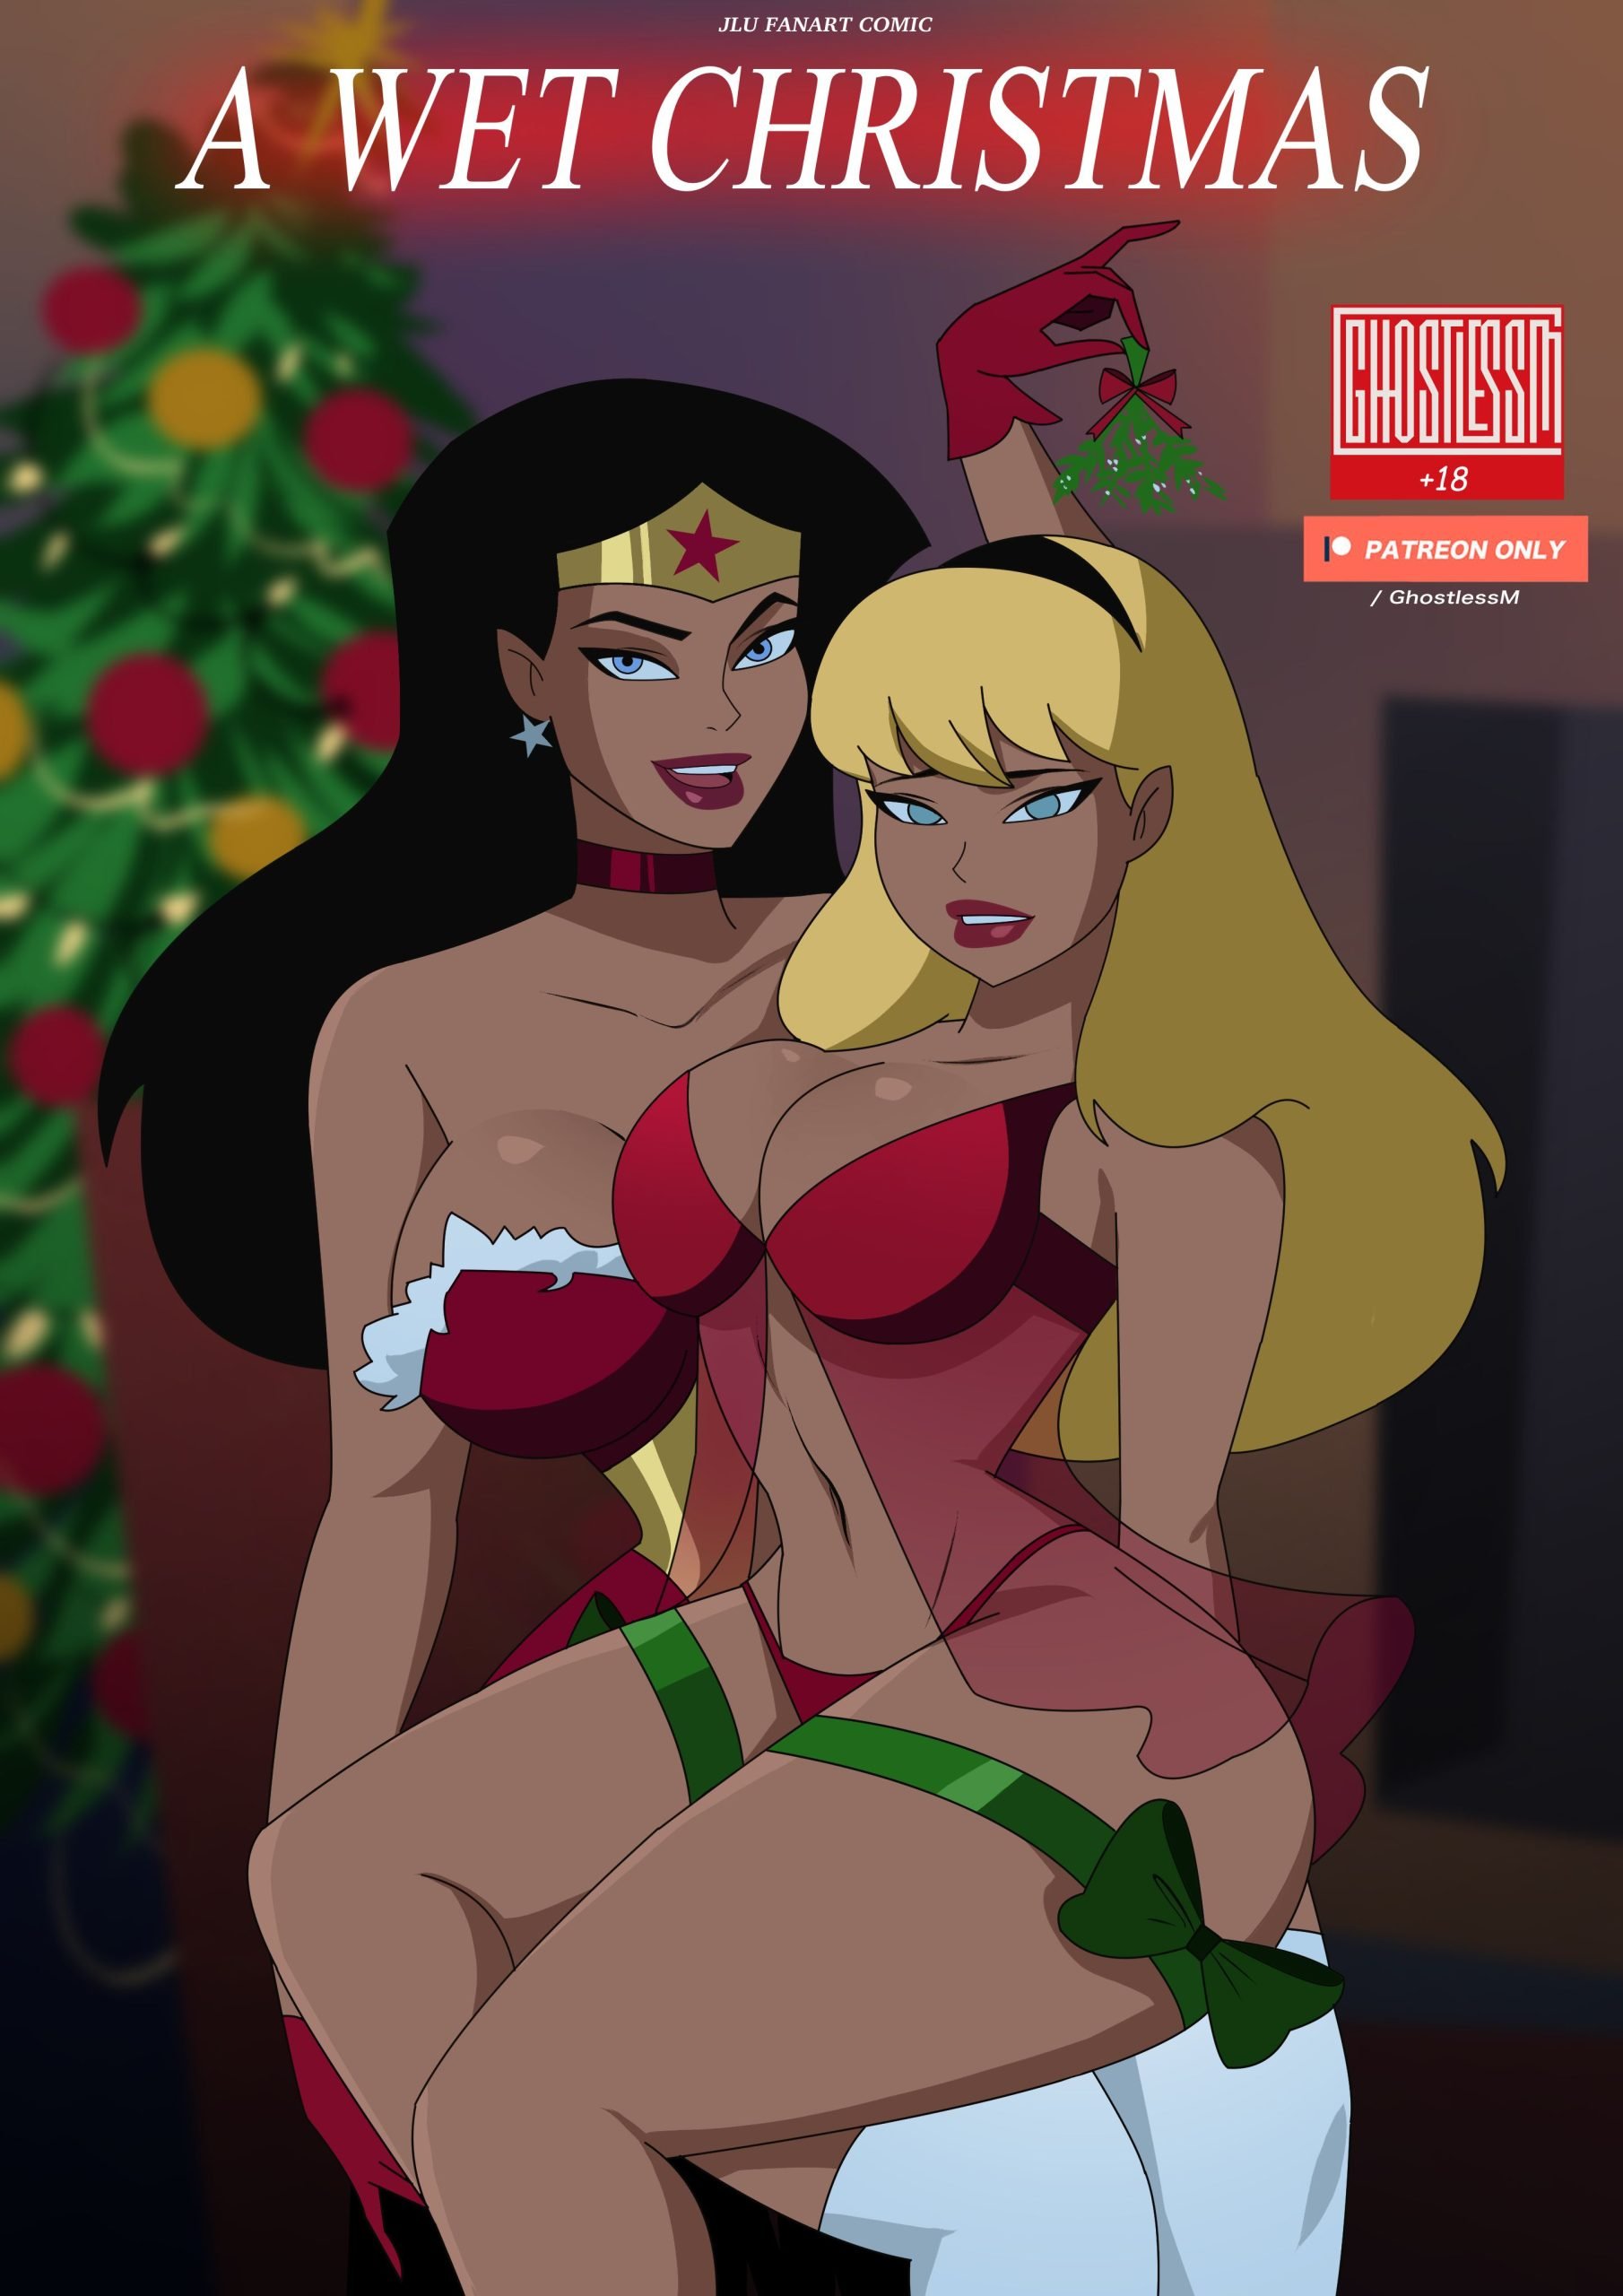 A Wet Christmas (Justice League) GhostlessM - 1  pic